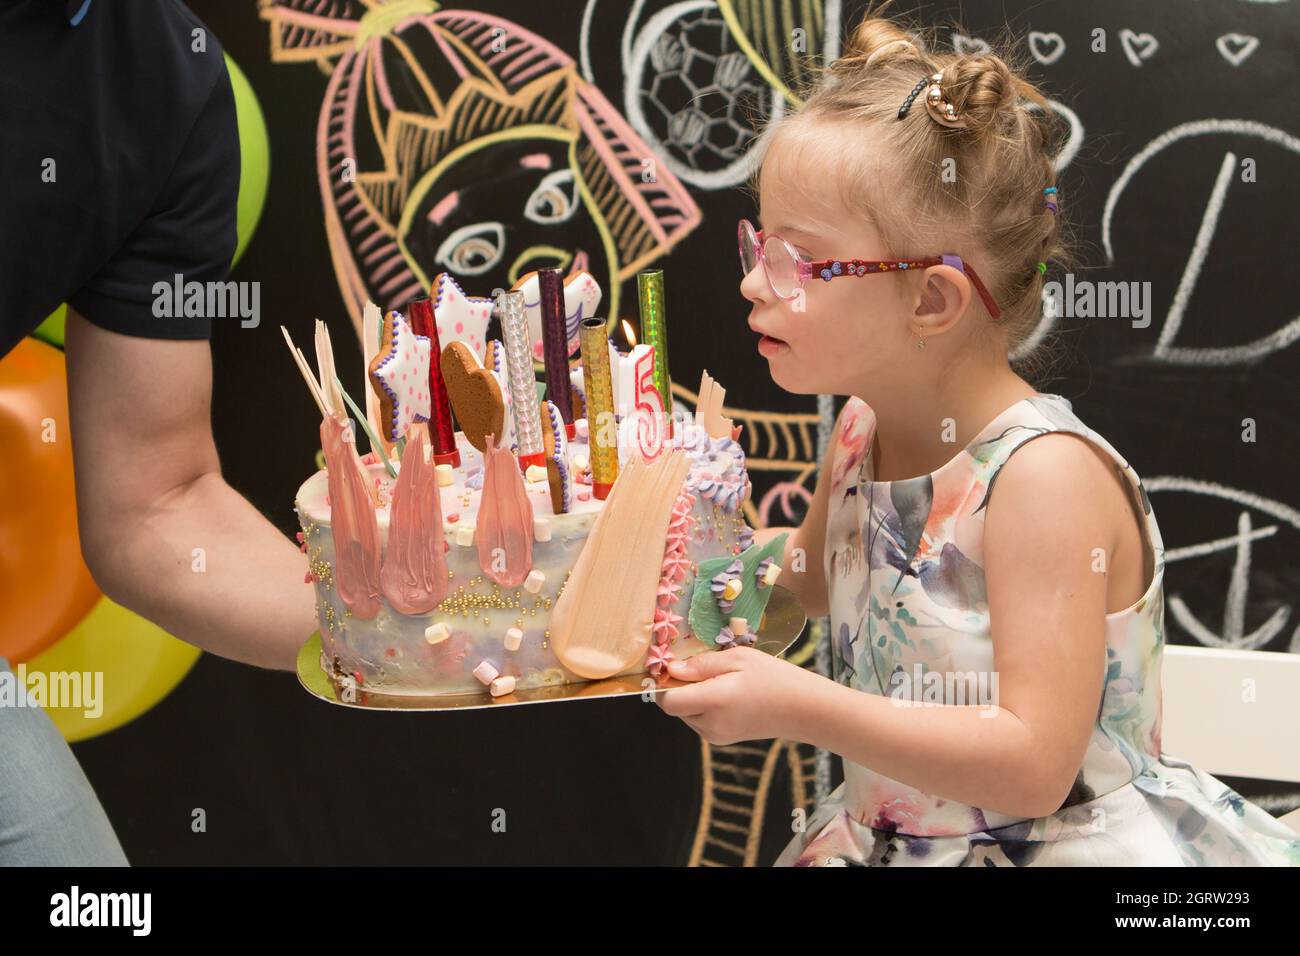 A girl with Down syndrome blows out candles on a cake on her birthday and make wishes Stock Photo